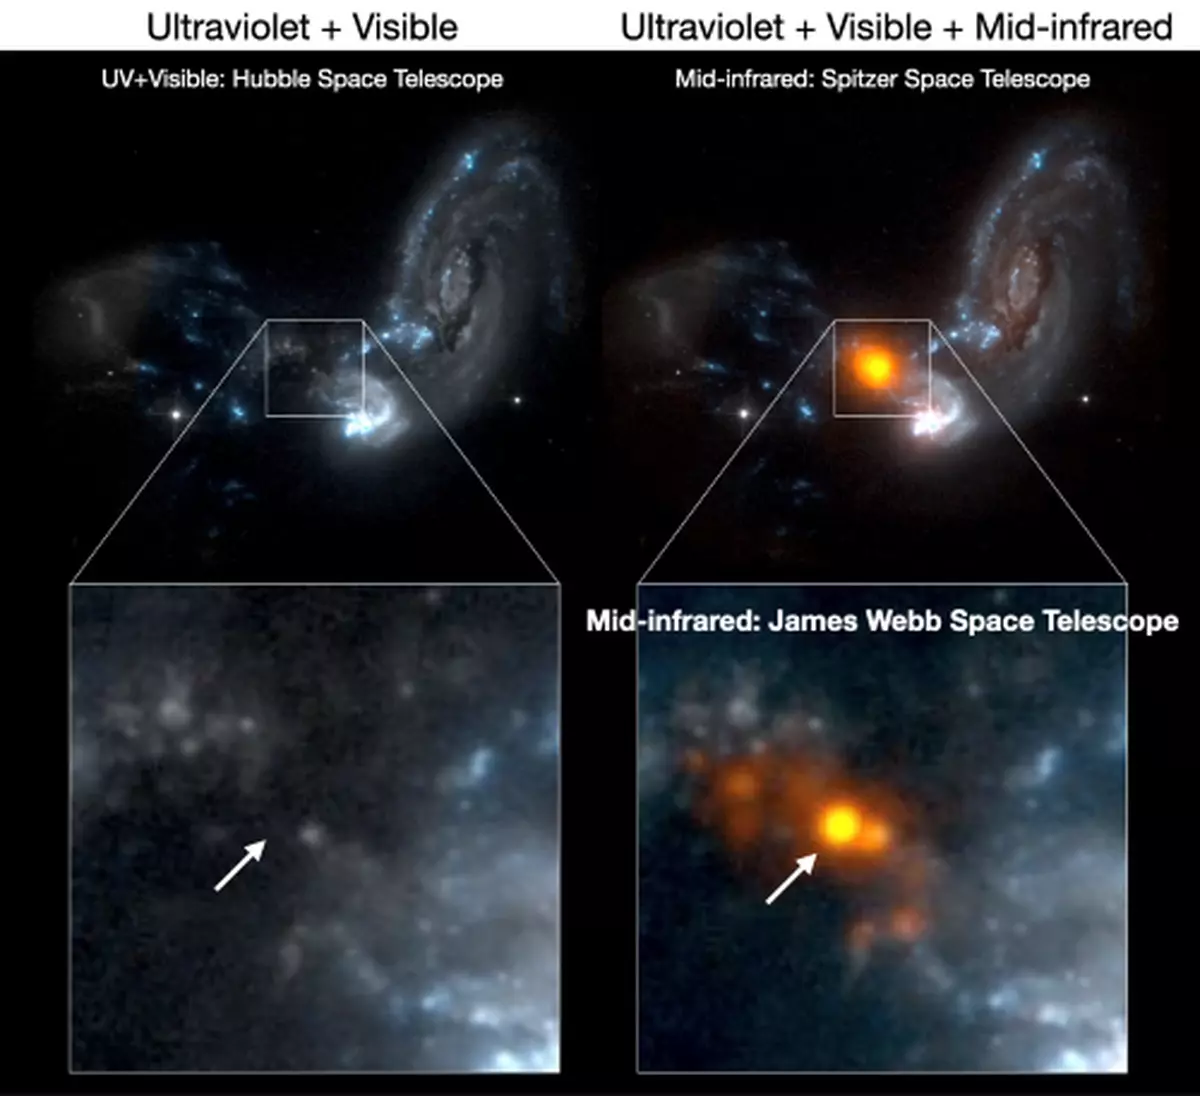 James Webb Space Telescope finds ‘engine’ powering the merger of galaxies